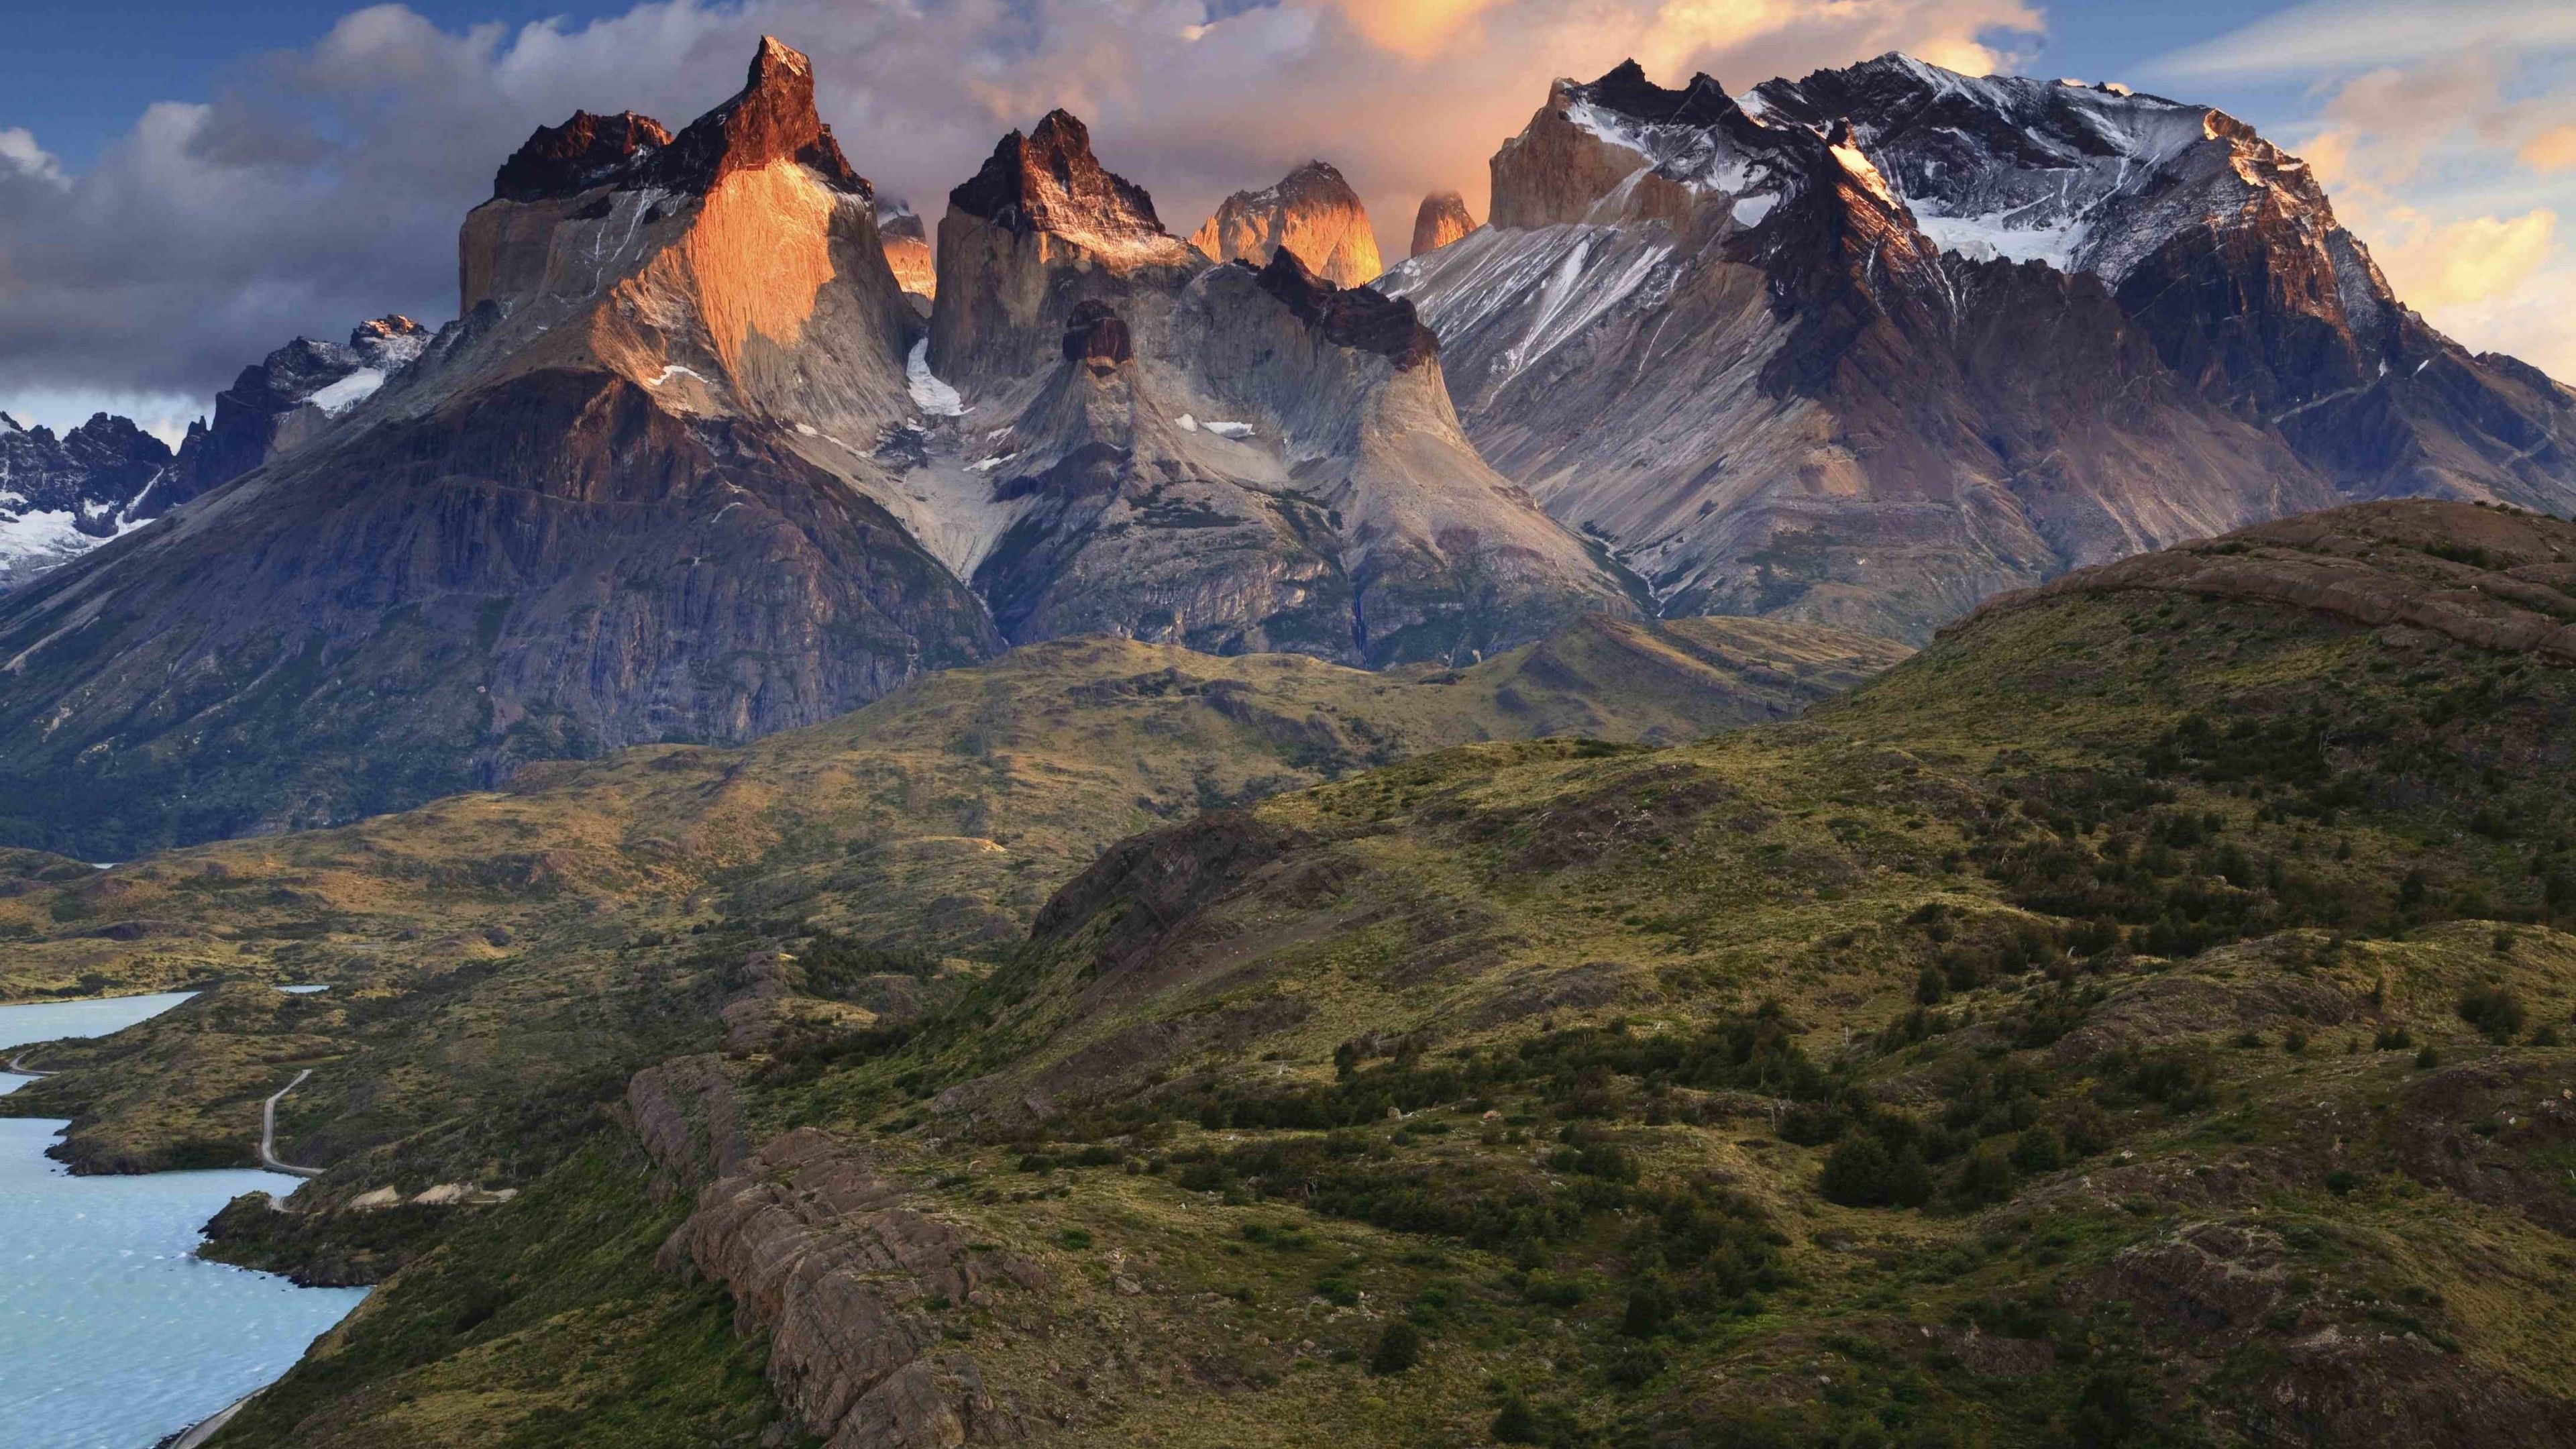 Chile: Torres del Paine National Park, Non-urban area, Scenery. 3840x2160 4K Wallpaper.